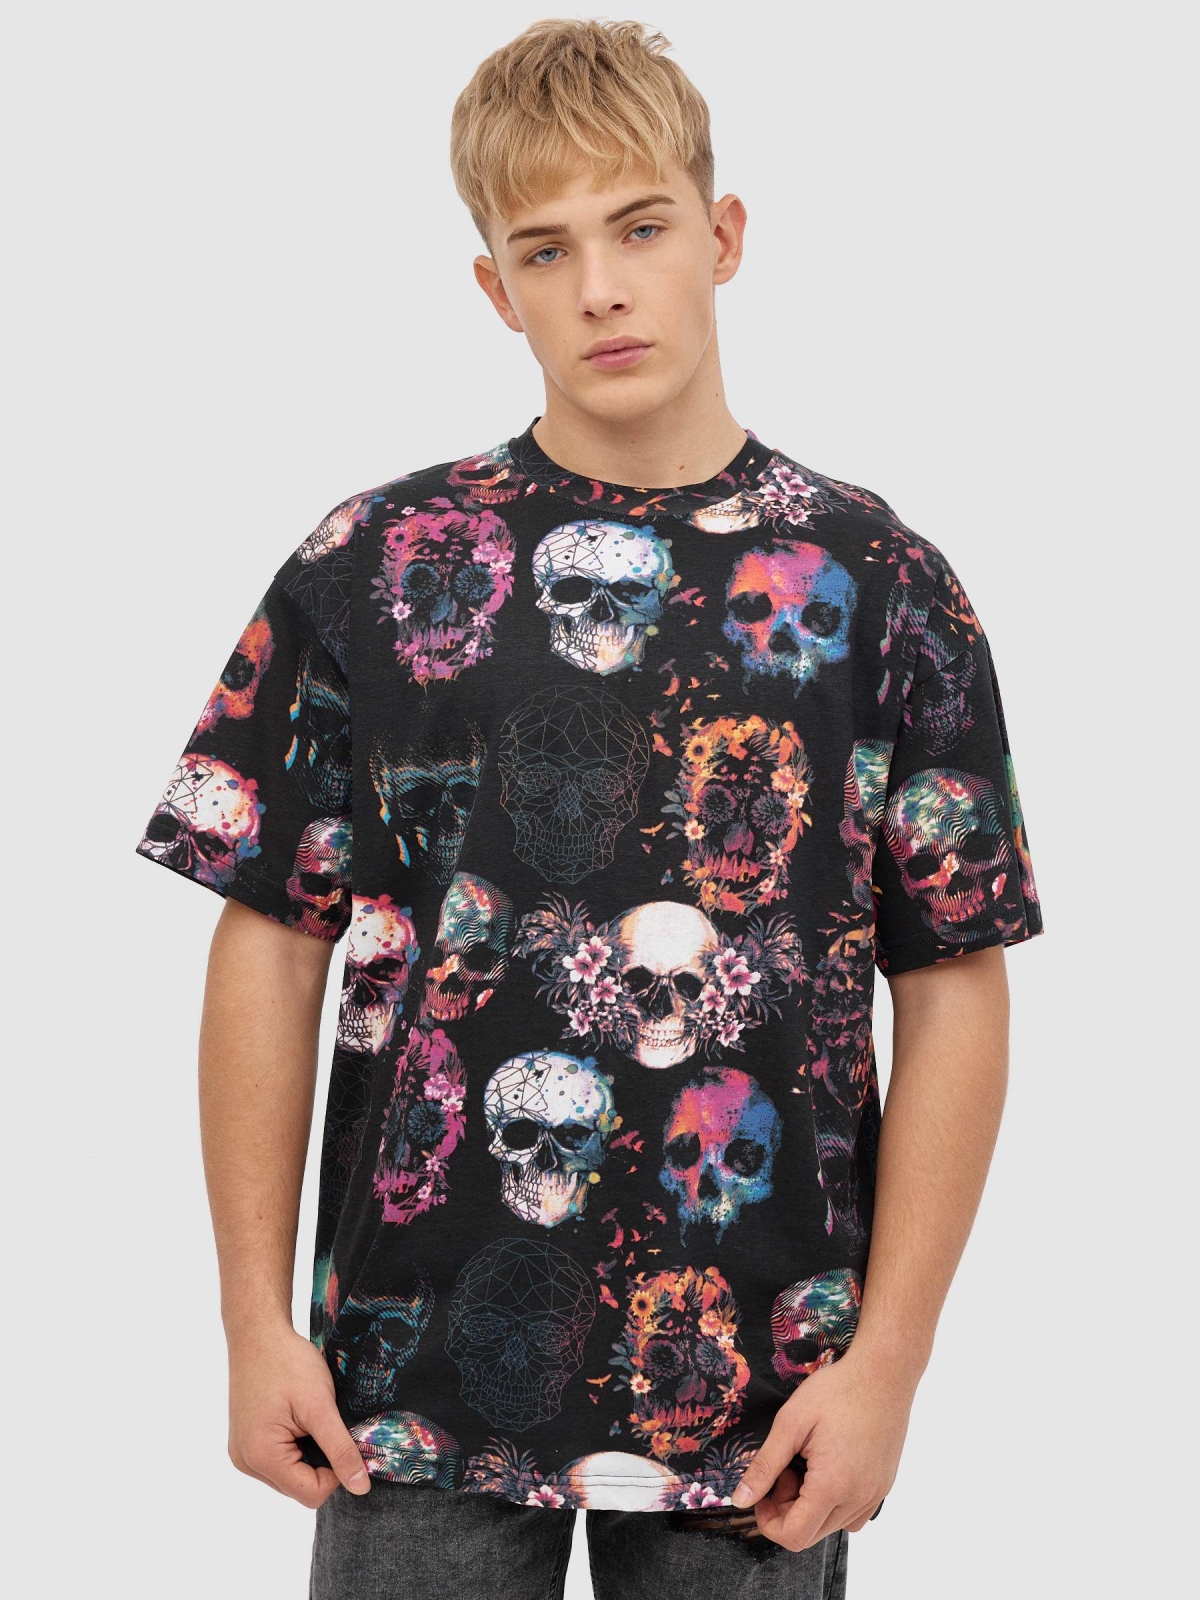 Multicoloured skull t-shirt black middle front view